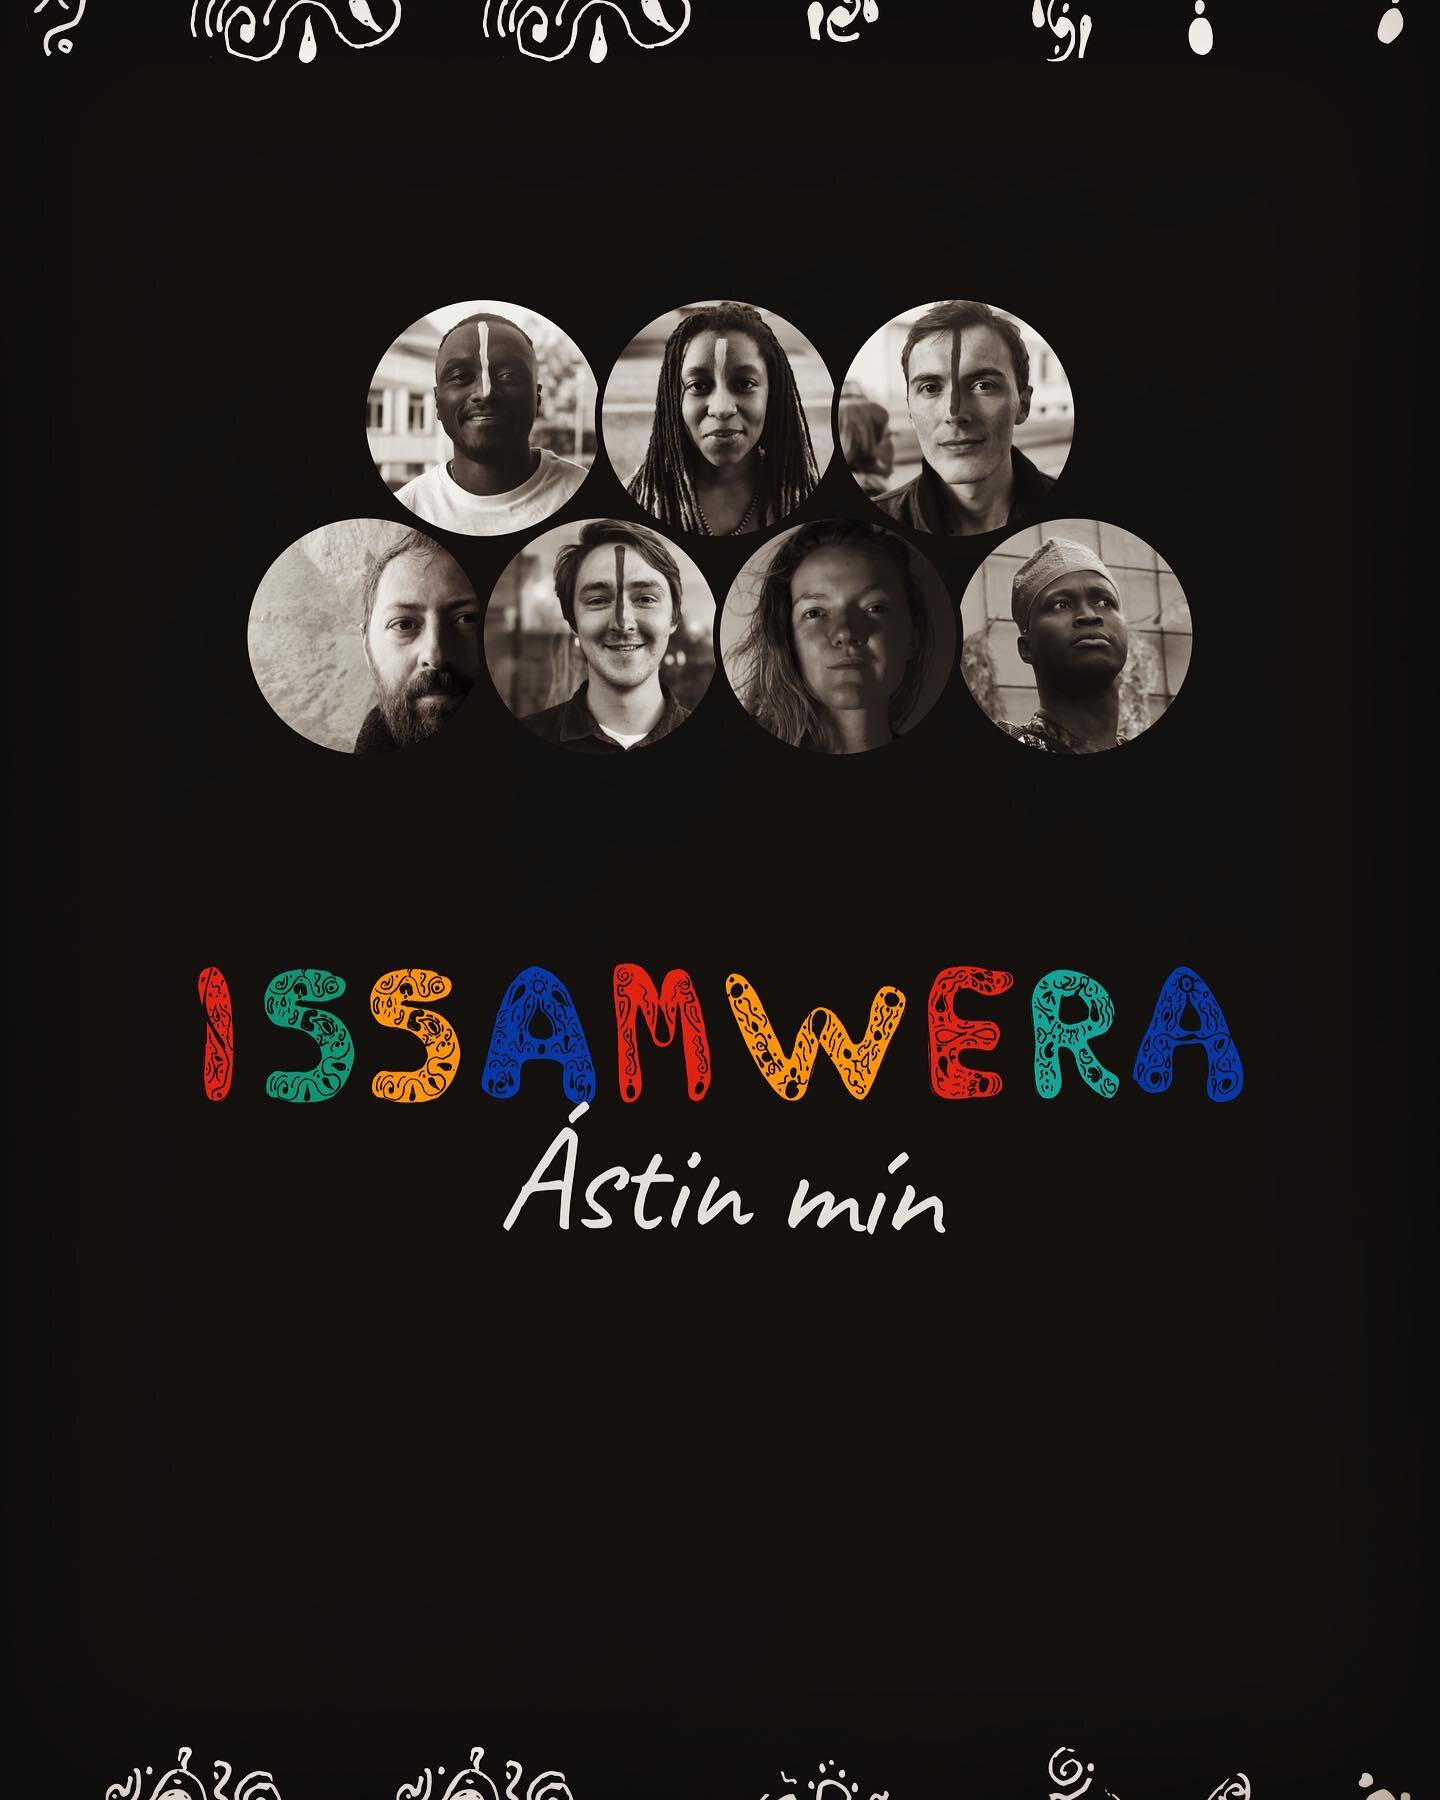 Vi&eth; erum Issamwera We are Issamwera

Here is a brief introduction into who we are, where the name Issamwera came from, and most importantly who played which instrument in the latest single &Aacute;stin M&iacute;n.  Have you listened to the song y